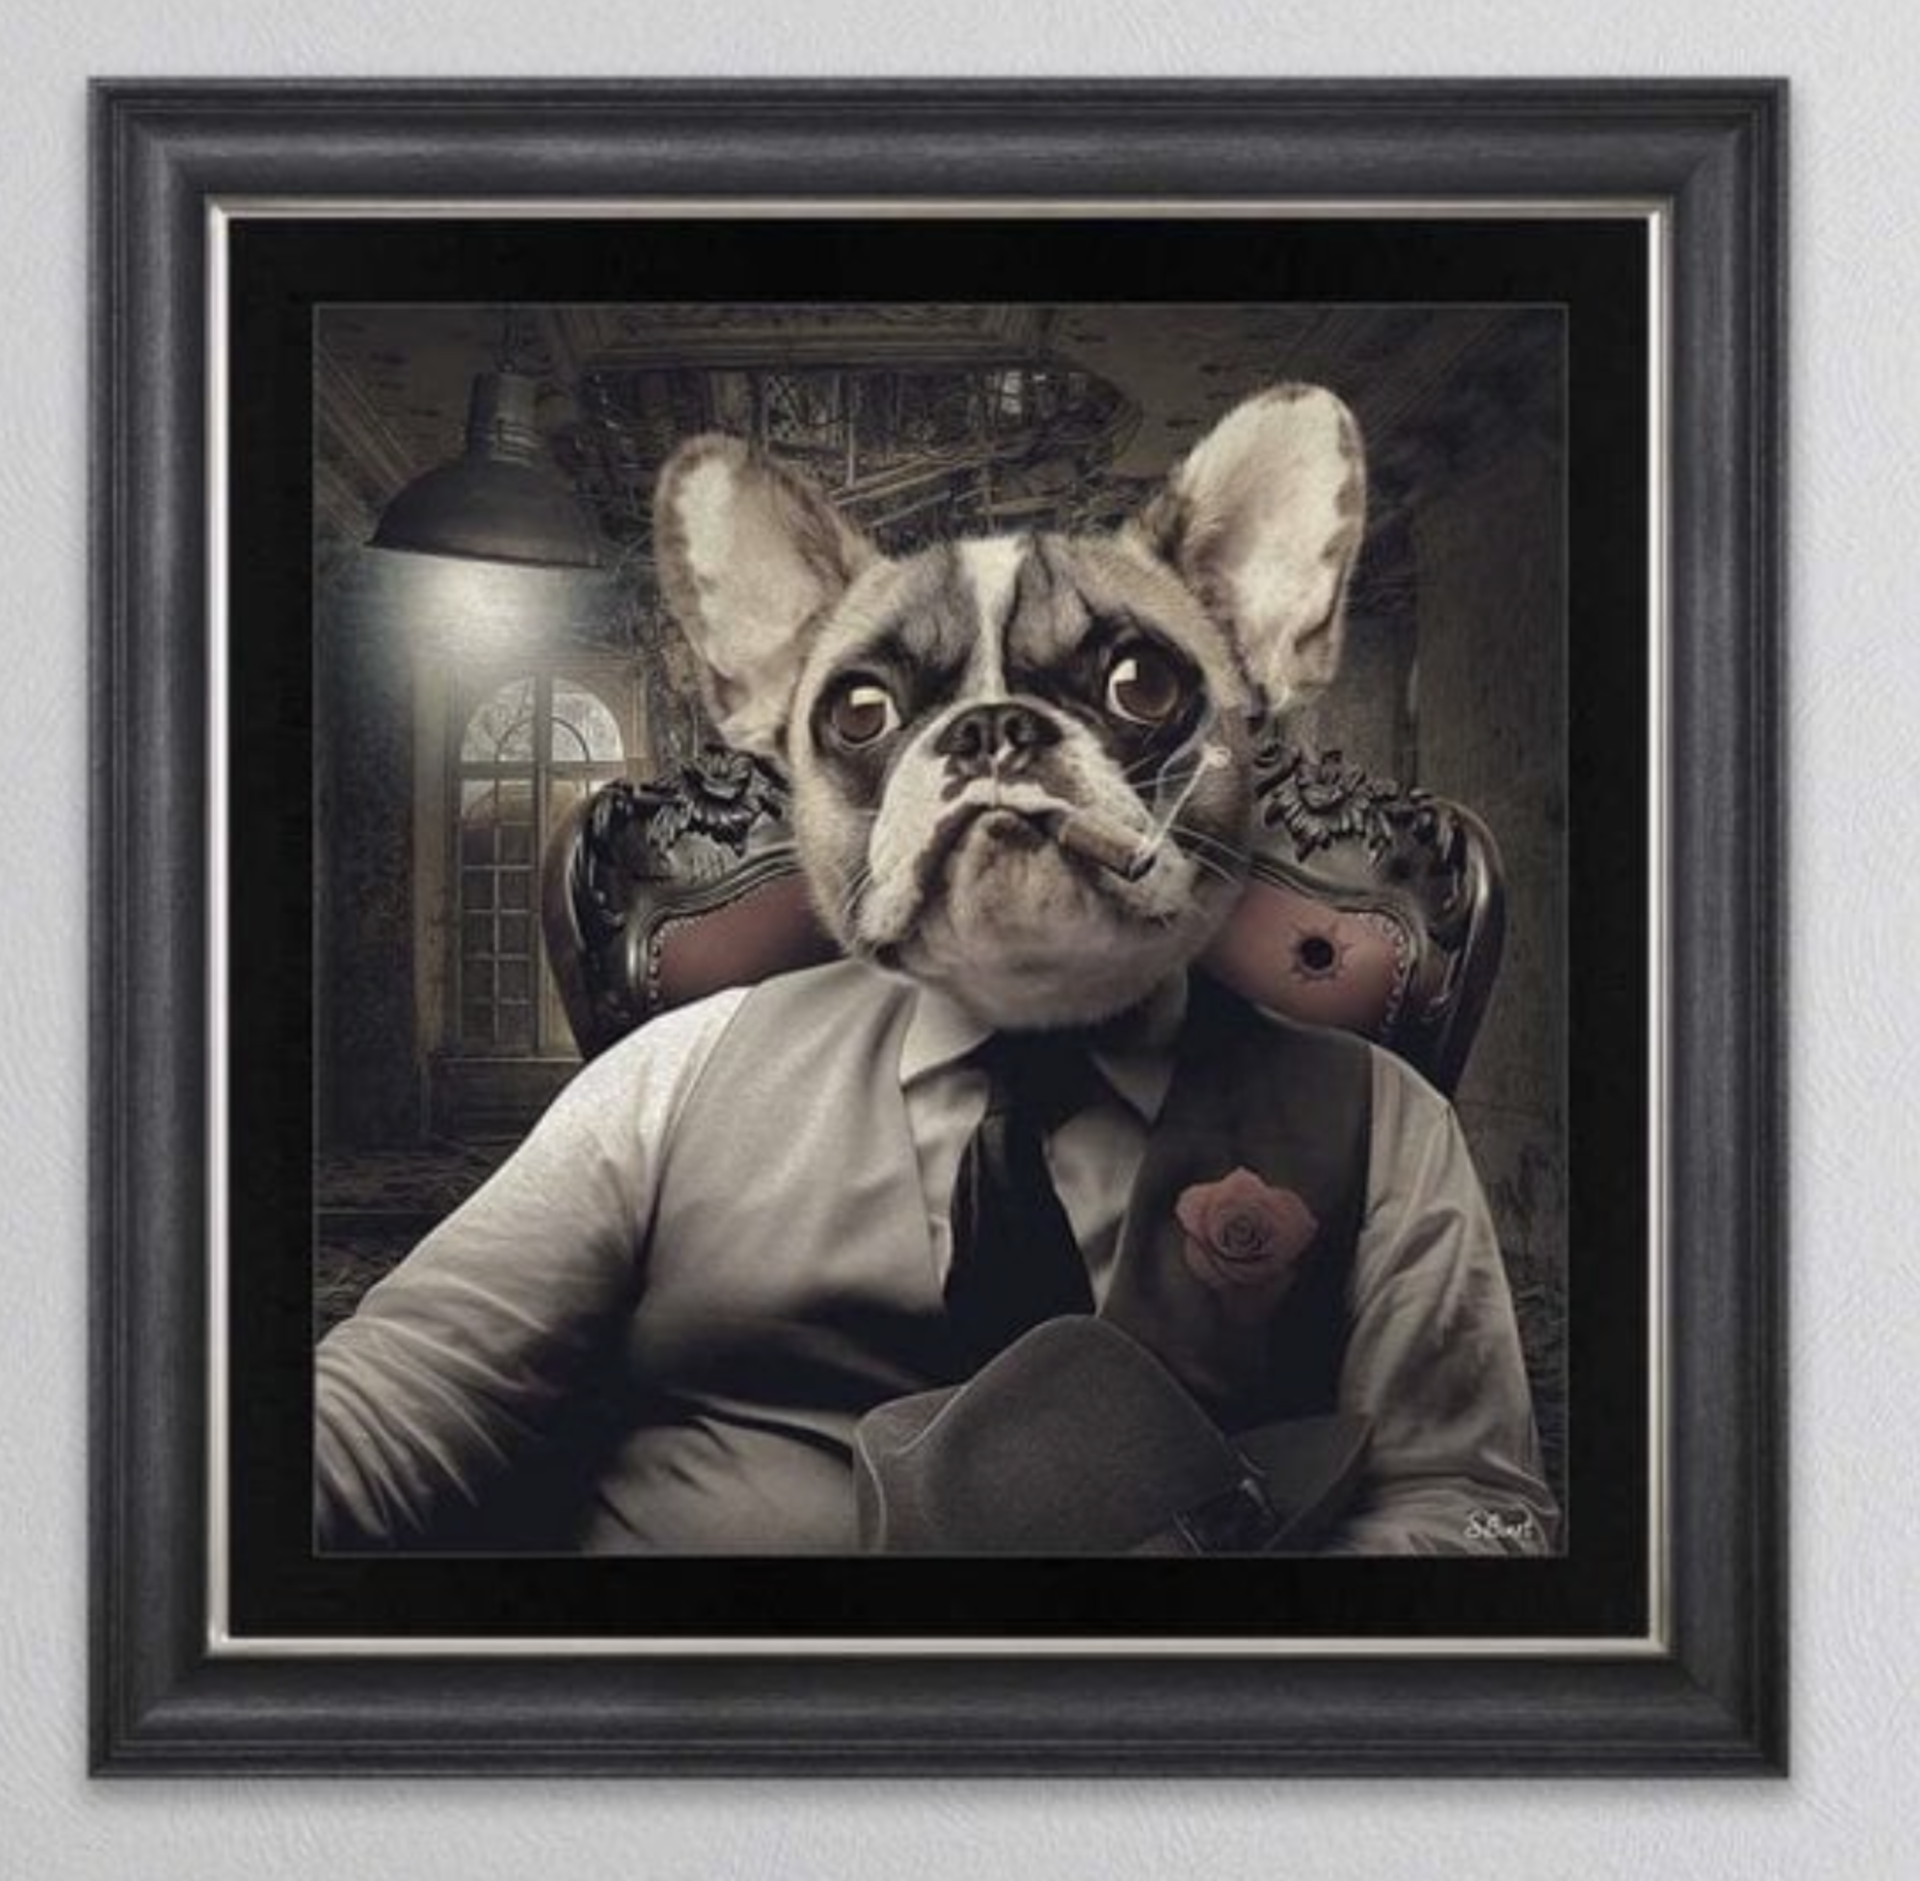 Frenchie The Boss framed art piece by Sylvain Binet - Brand New - Quality UK Manufactured